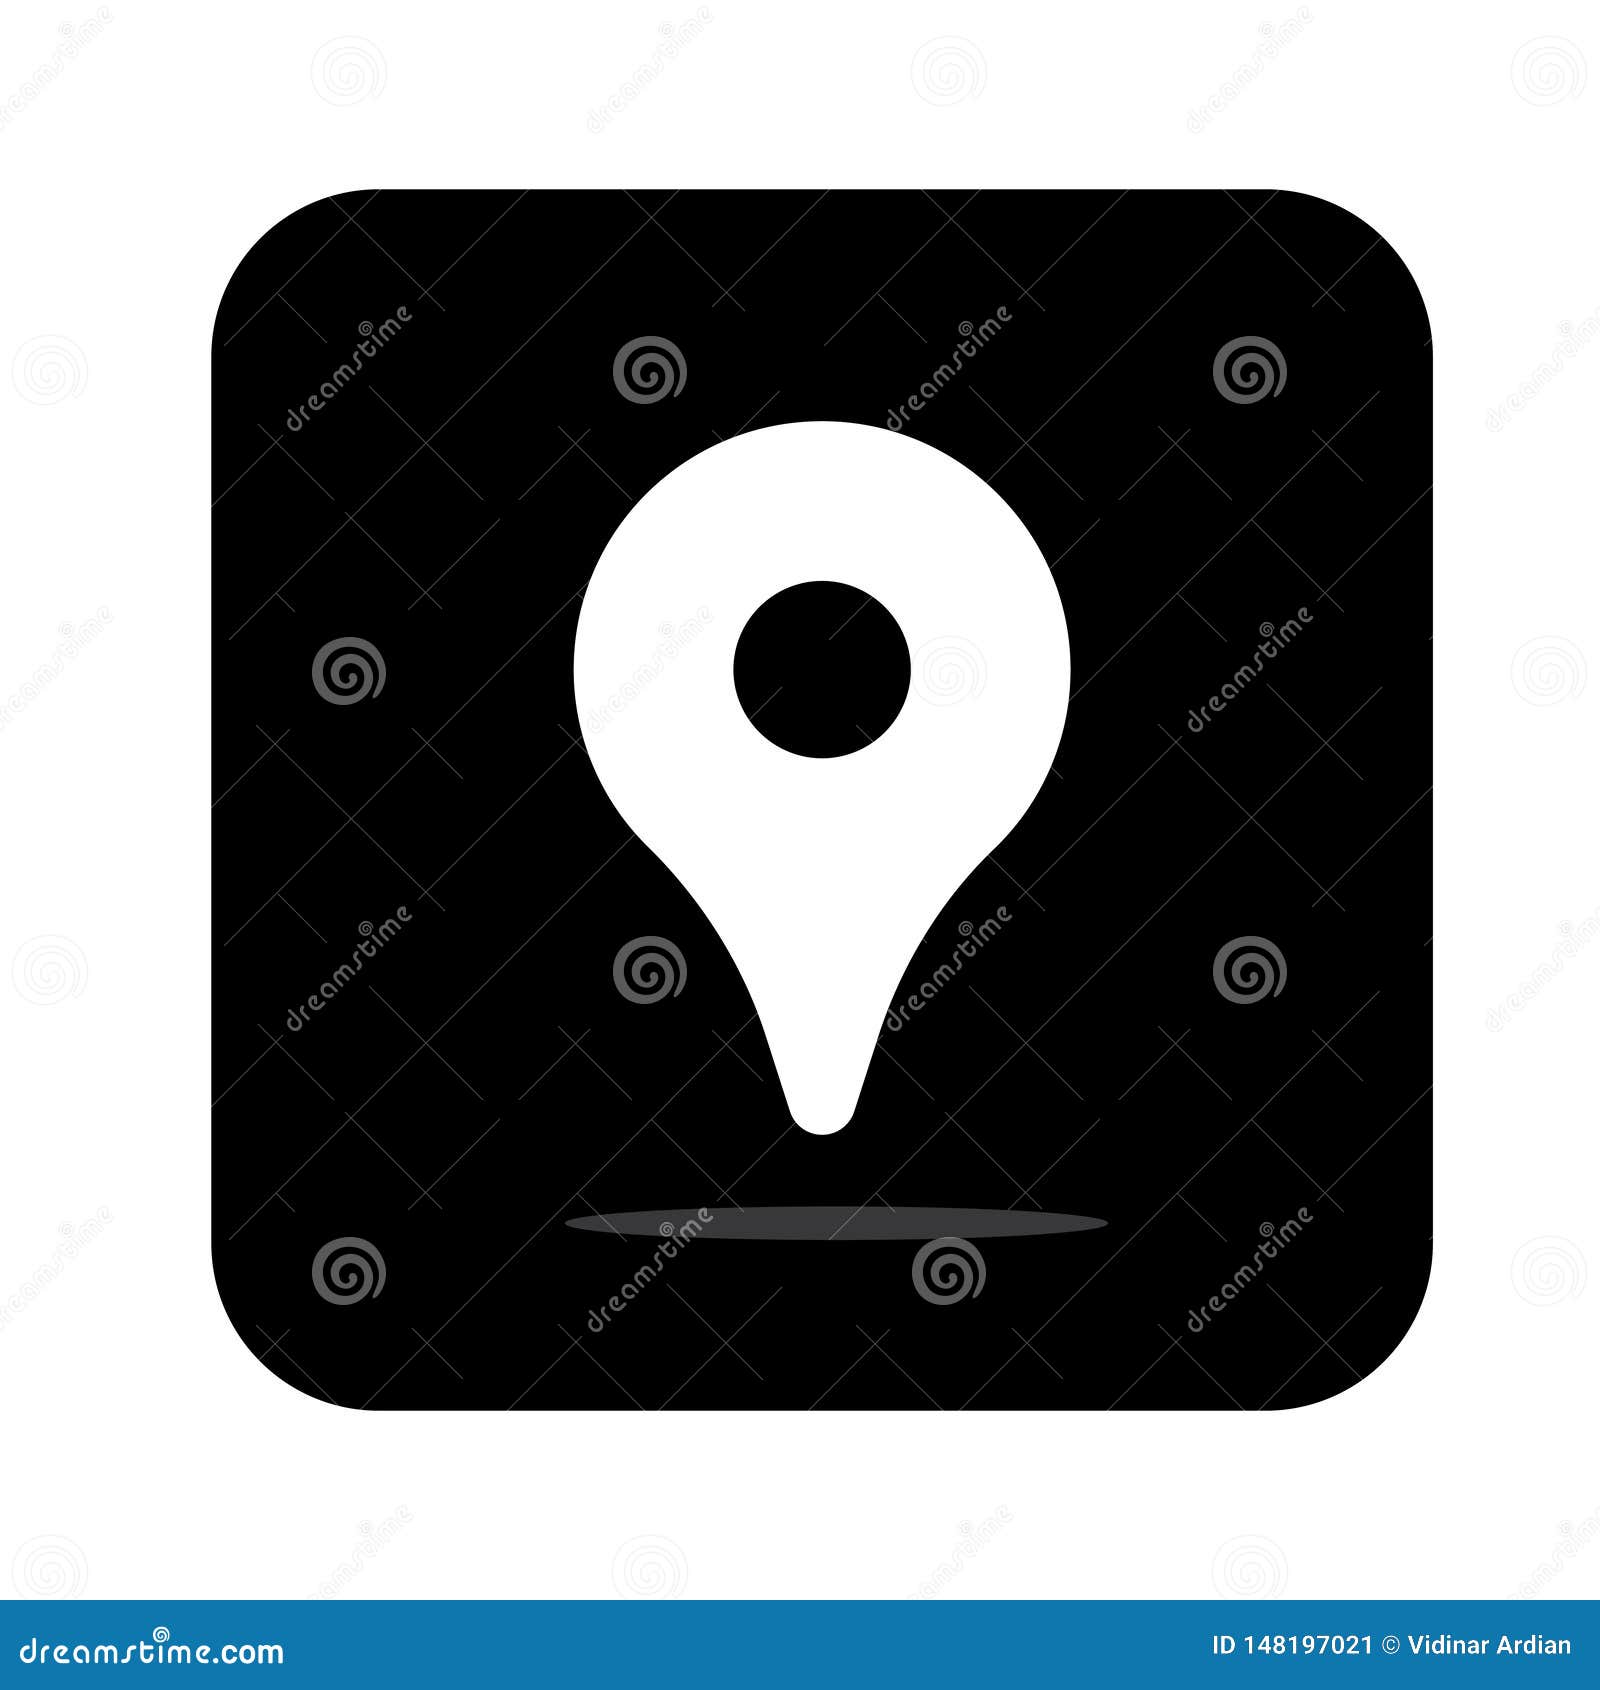 Maps Pin. Location Map Icon. Location Pin. Pin Icon Vector Stock ...